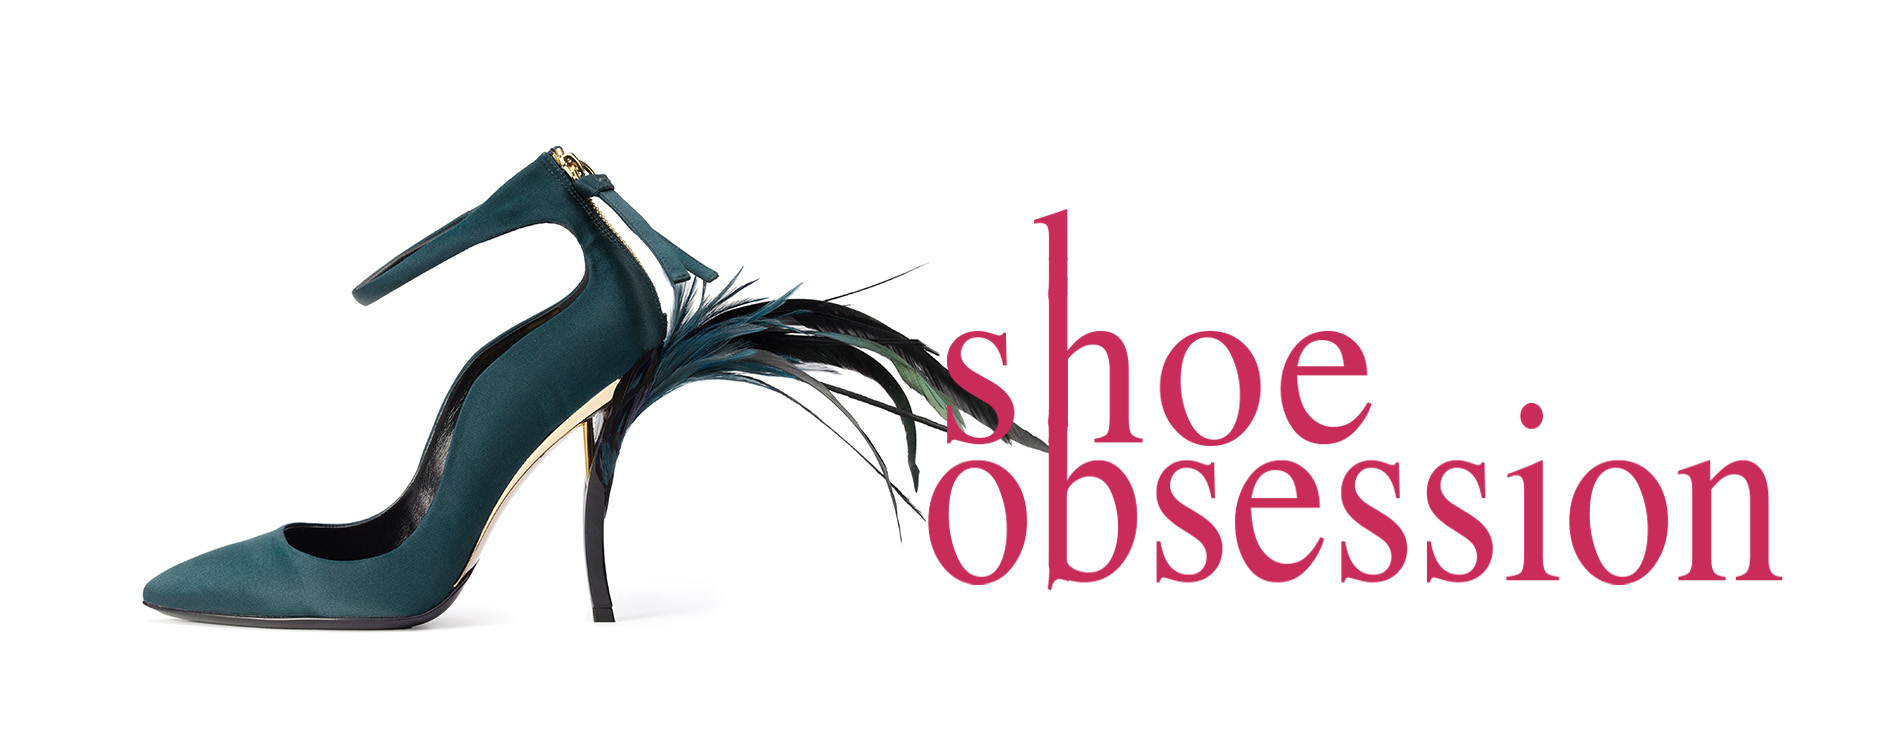 shoe obsession graphic 